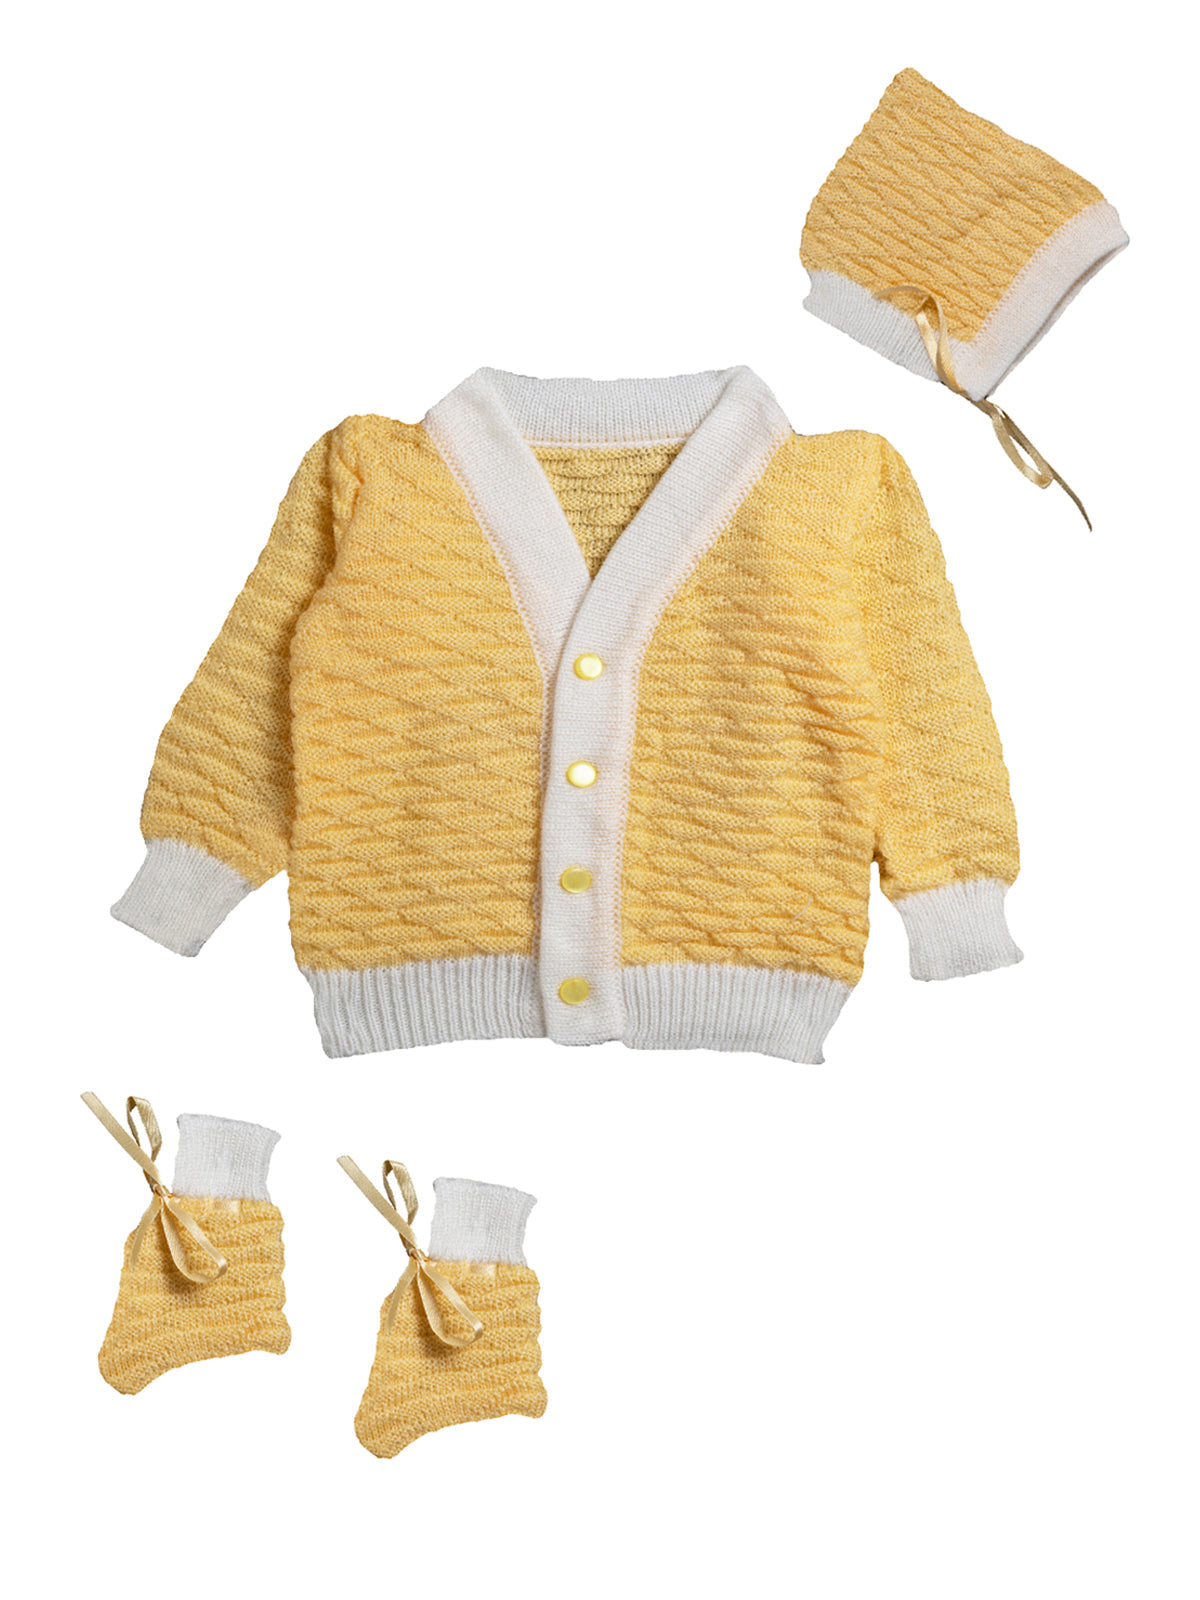 Yellow Color Self Design Sweater with Cap and Pair of Socks